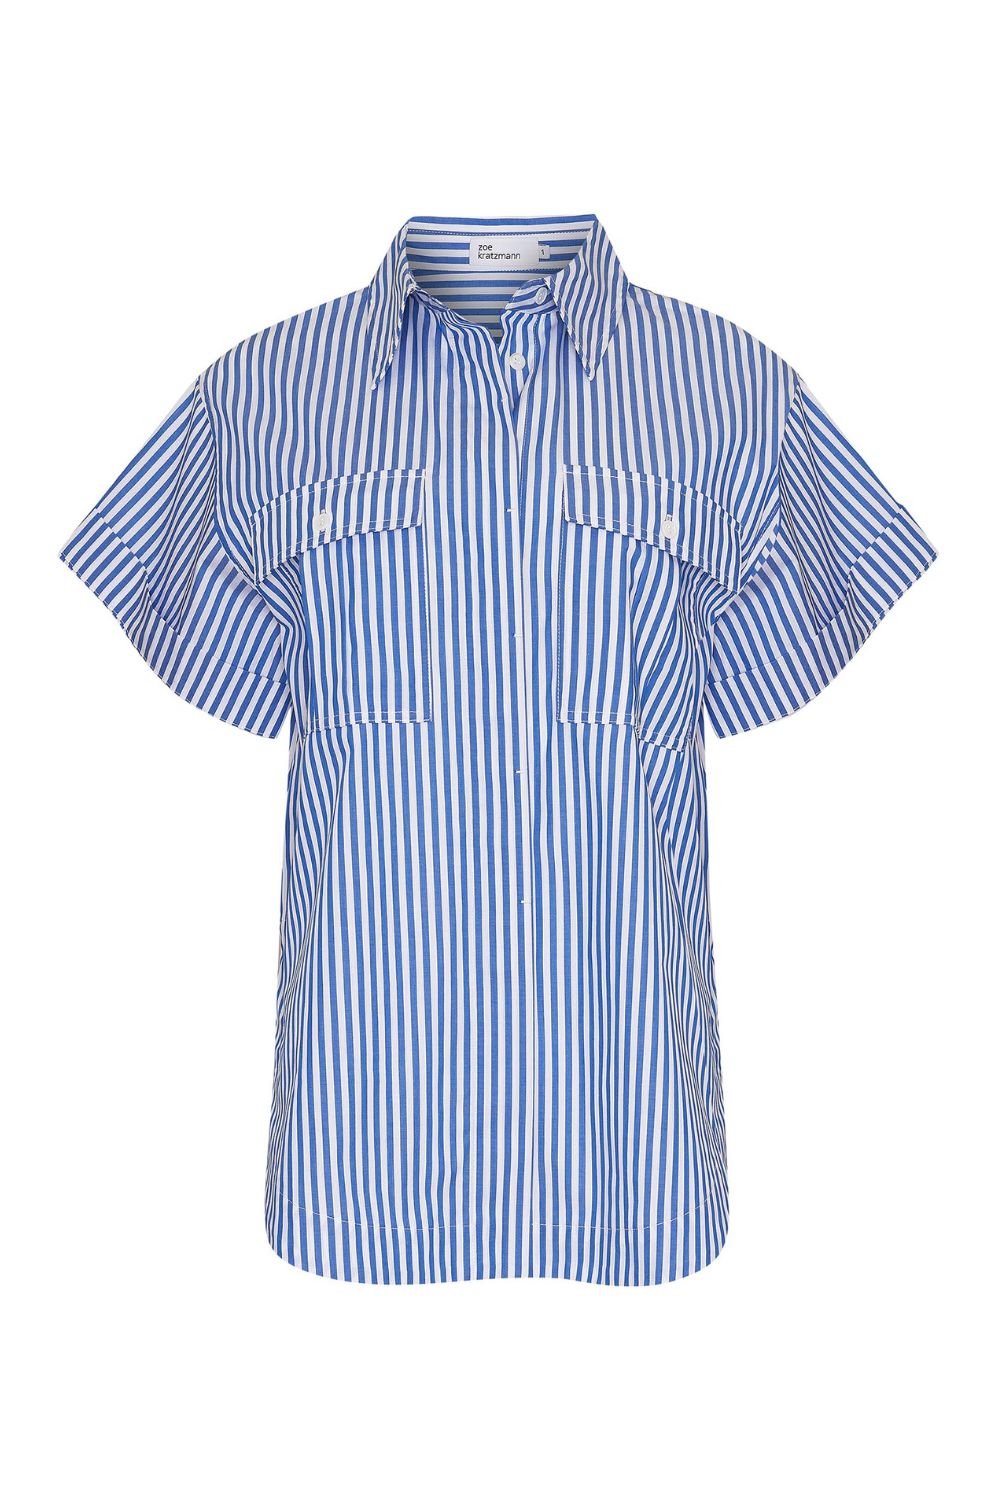 blue and white stripe, cuffed short sleeve, high-low hemline, covered placket, oversized patch pockets, shirt, top, product image